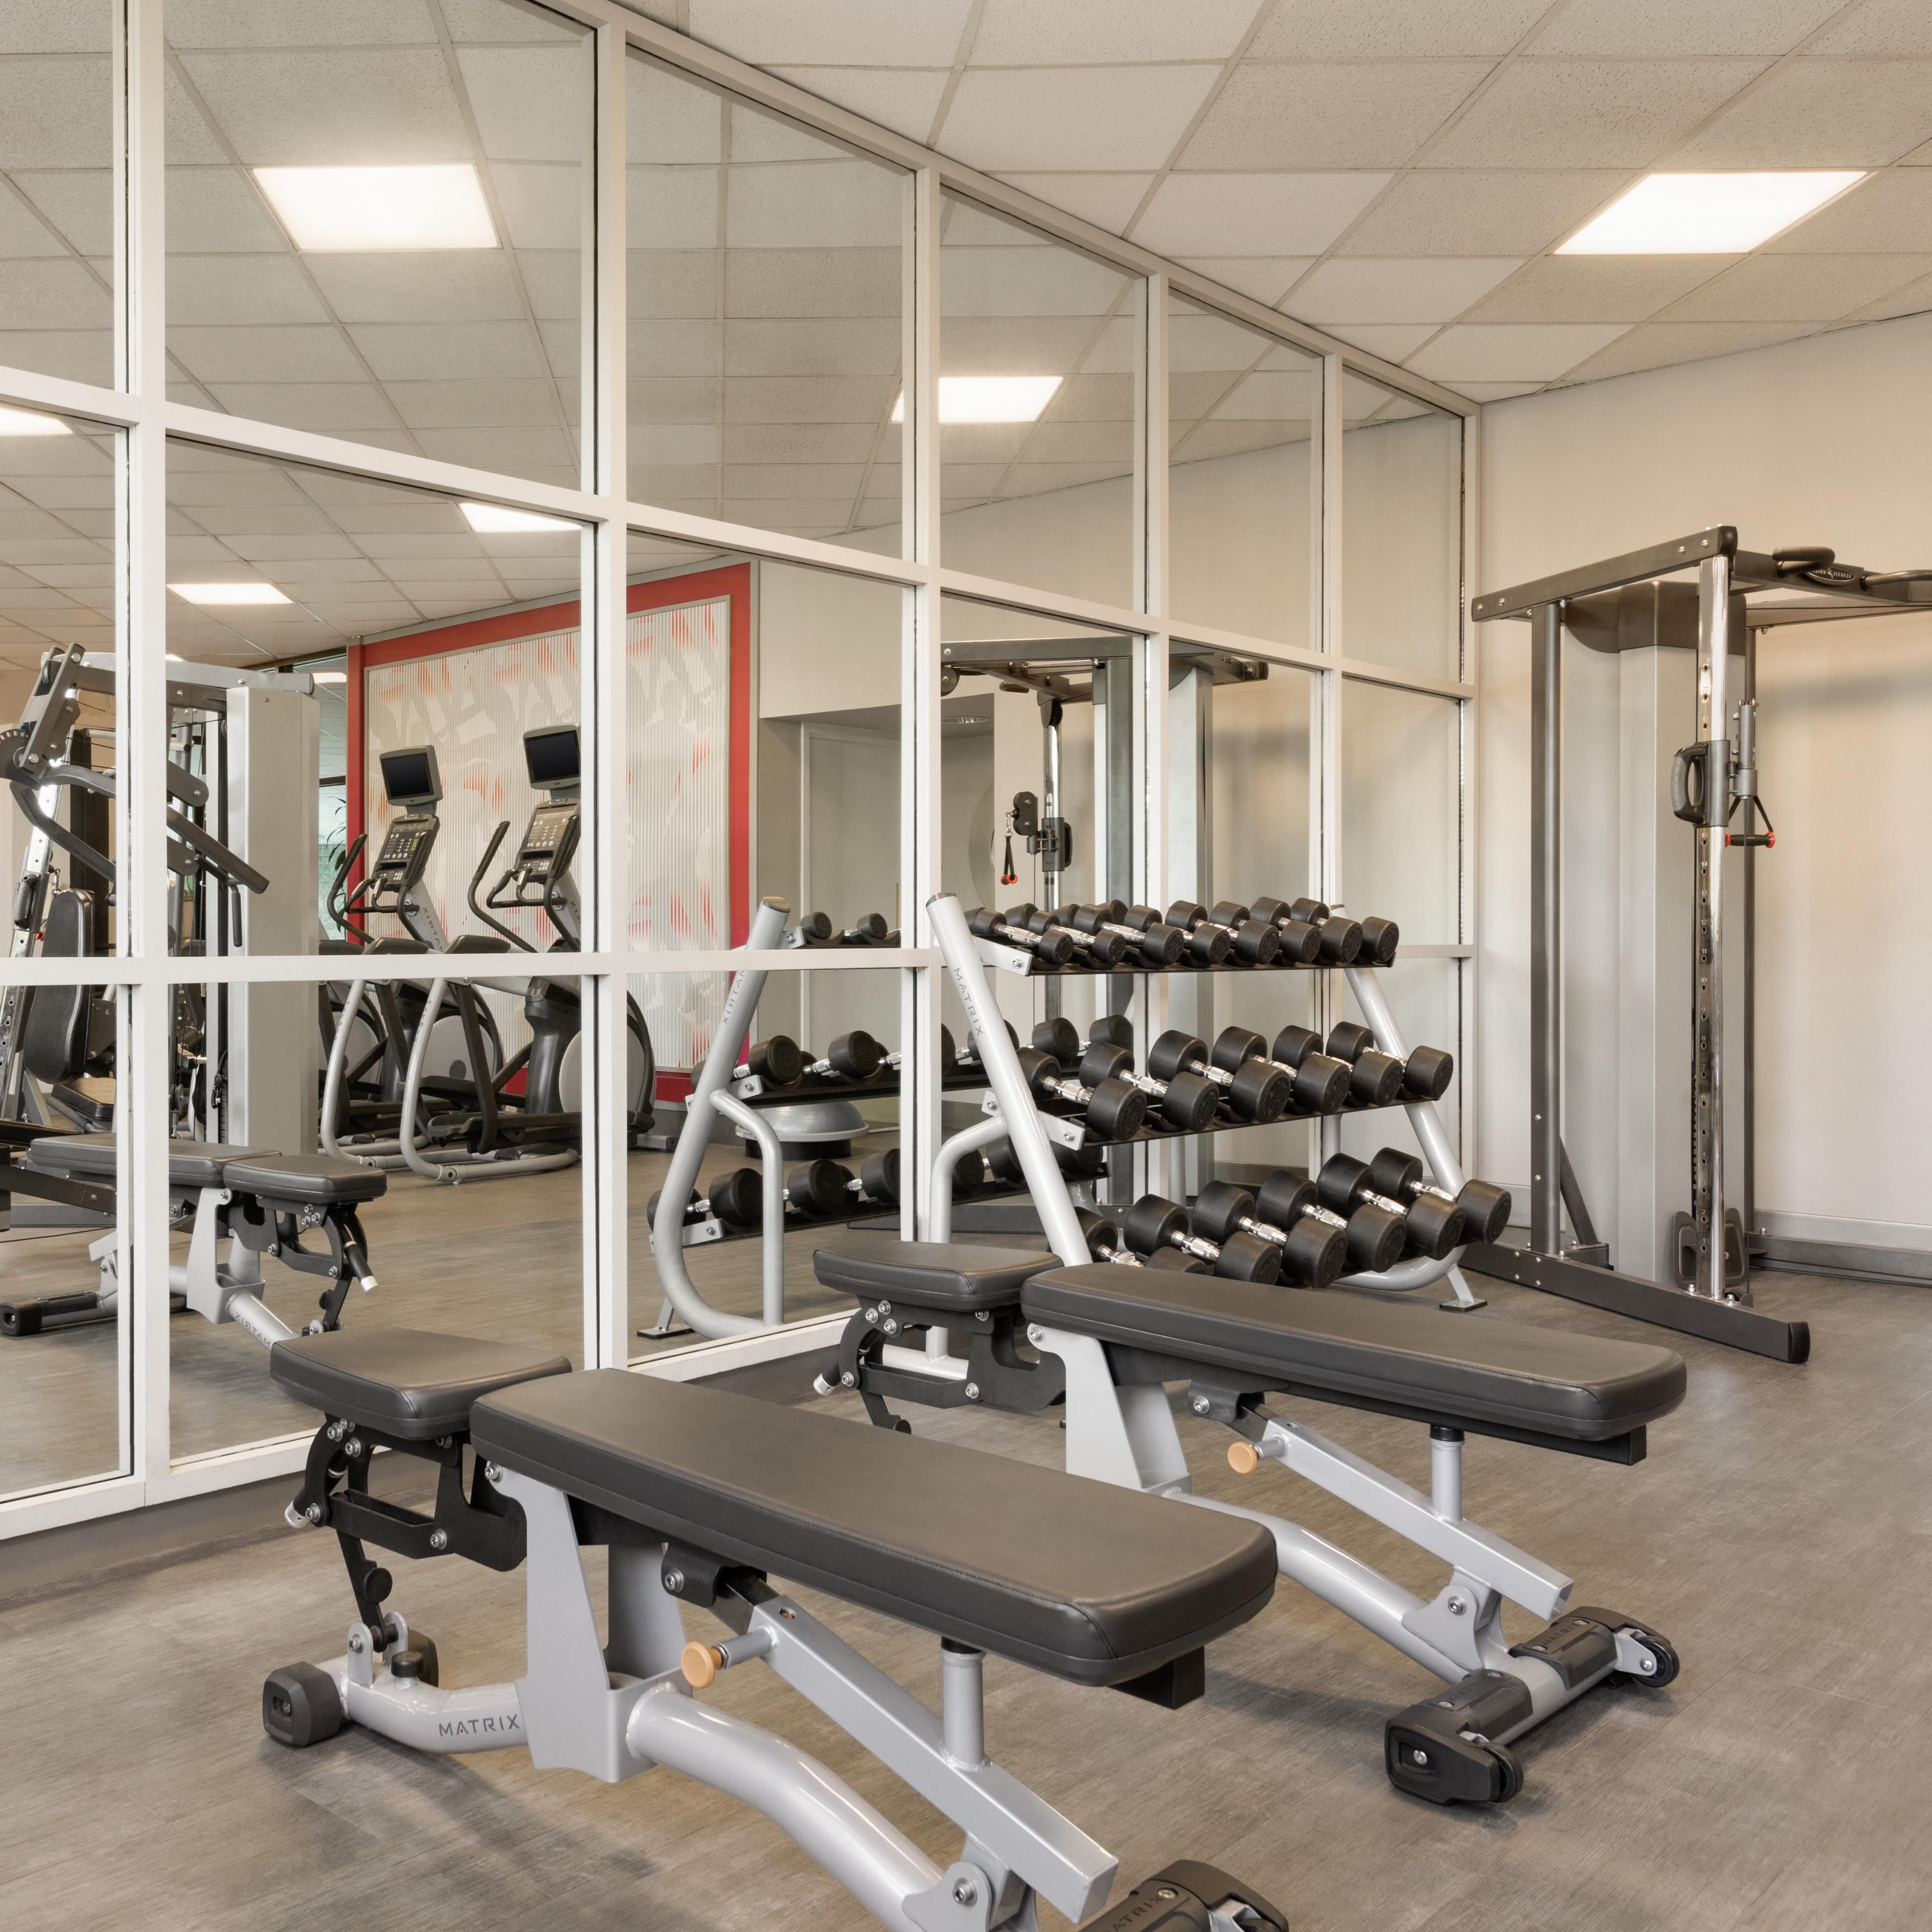 Our large fitness center allows you to keep up with your routine.